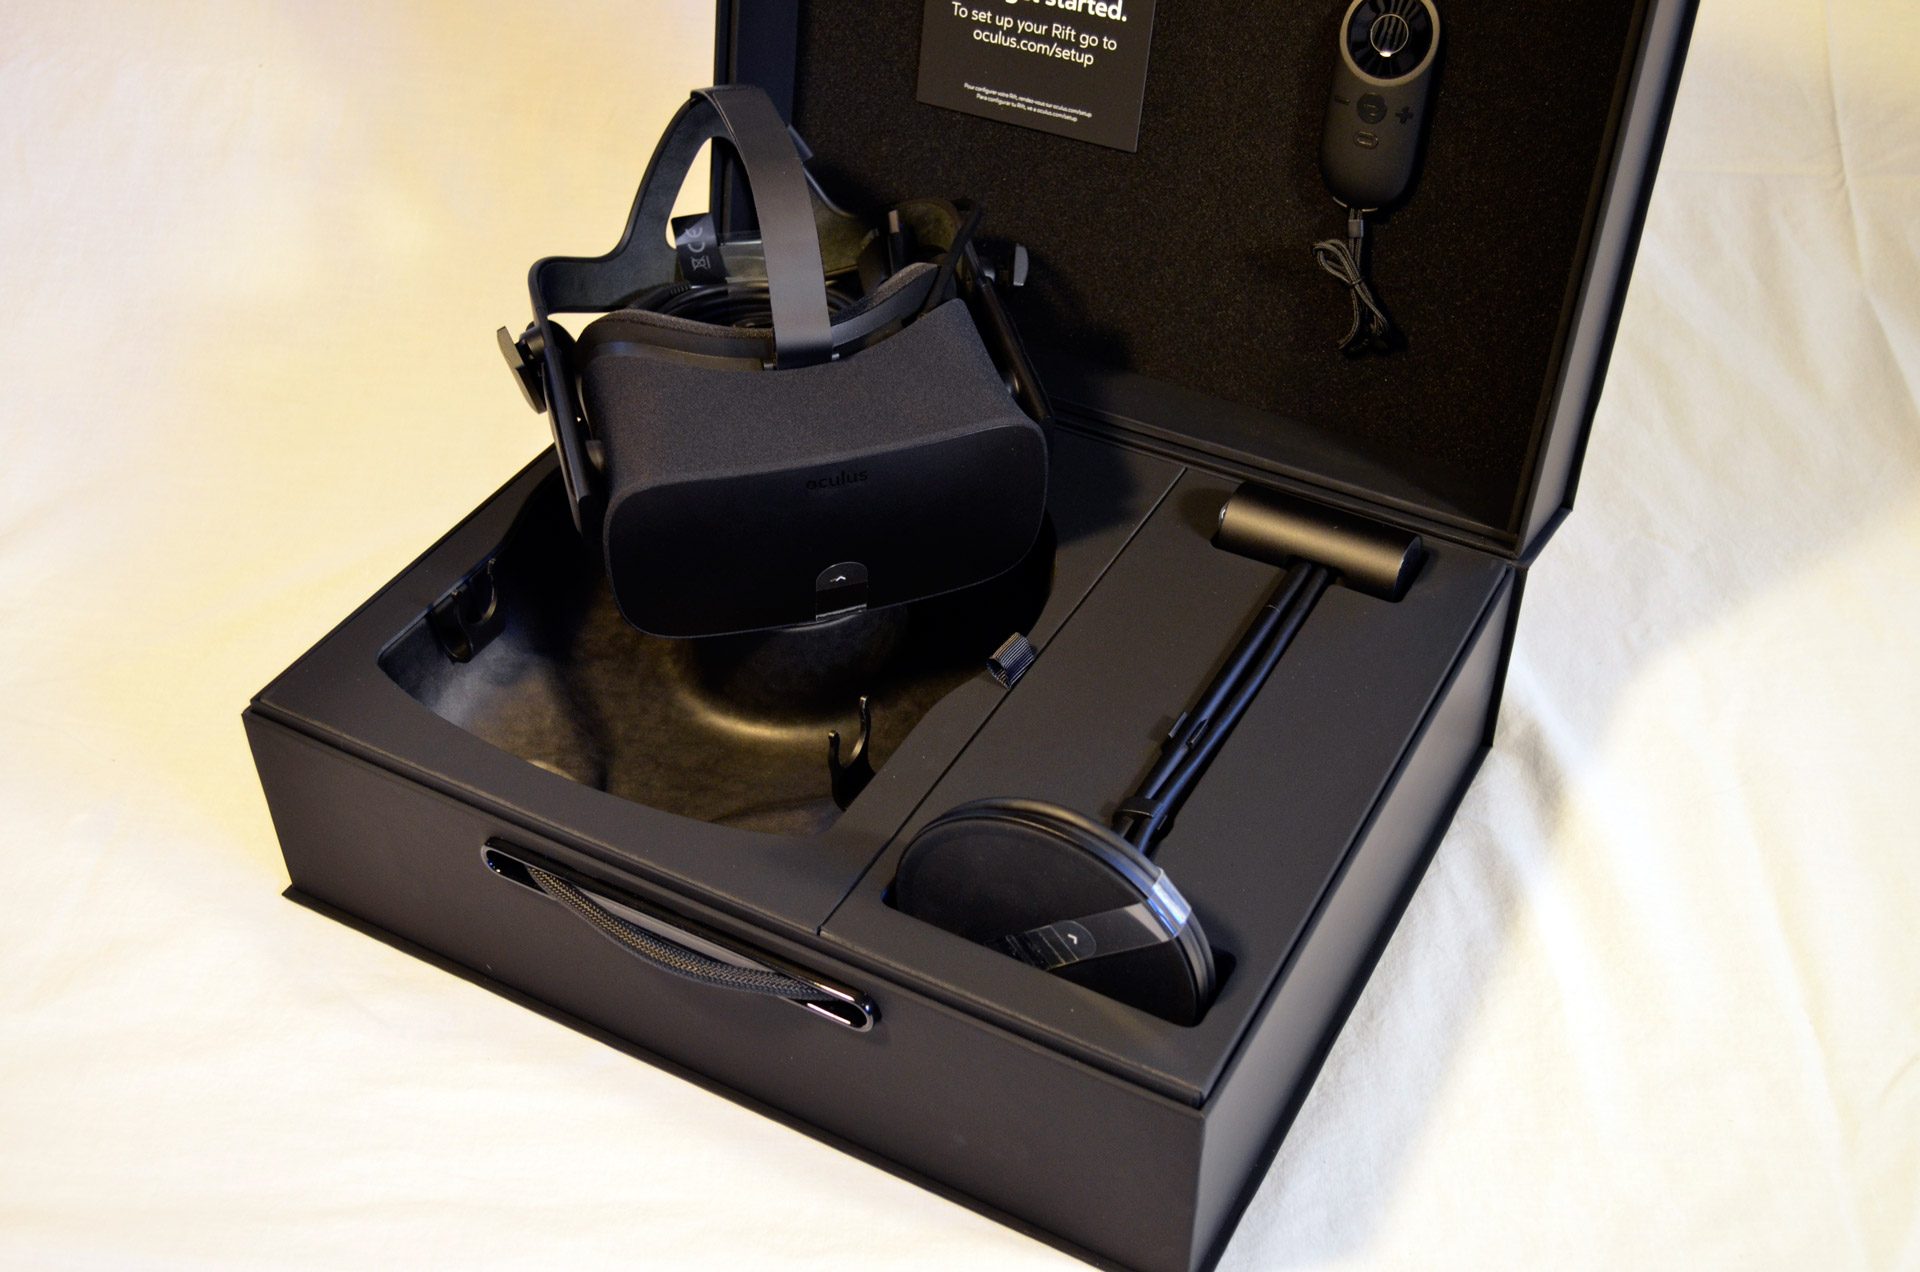 Unboxing the New Oculus Rift Step-by-Step in Pictures – Road to VR